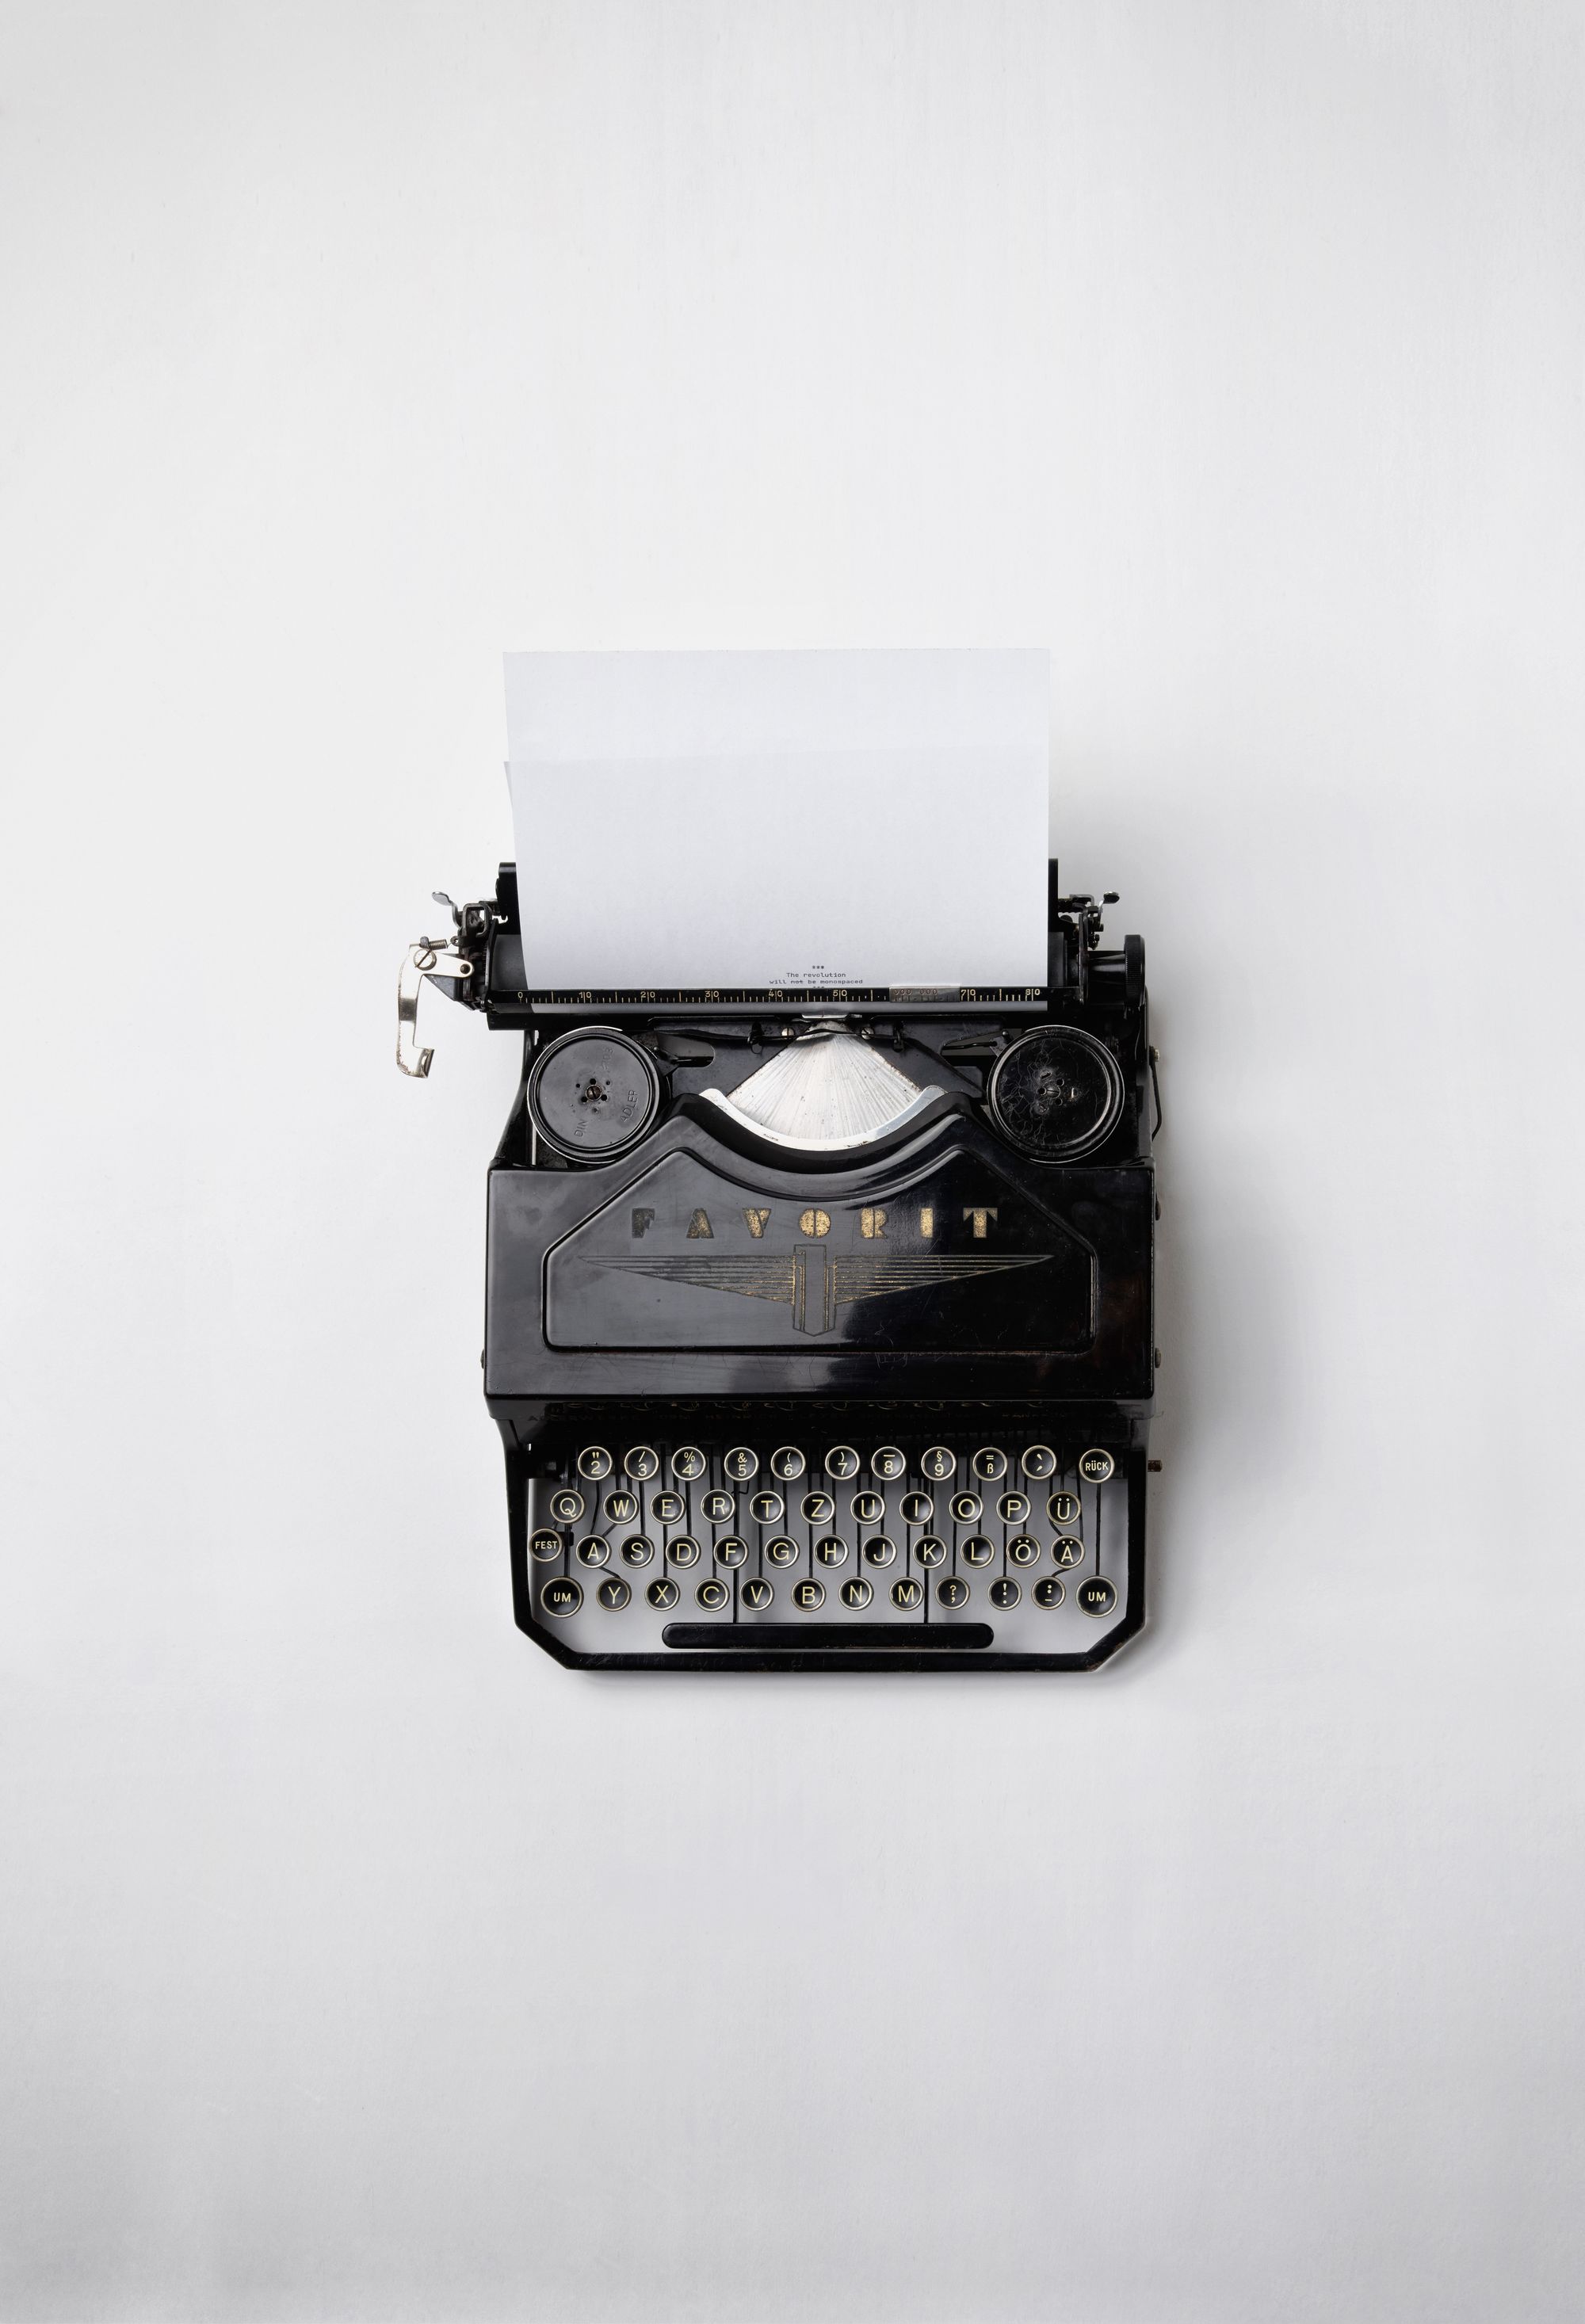 A typewriter on a white surface.